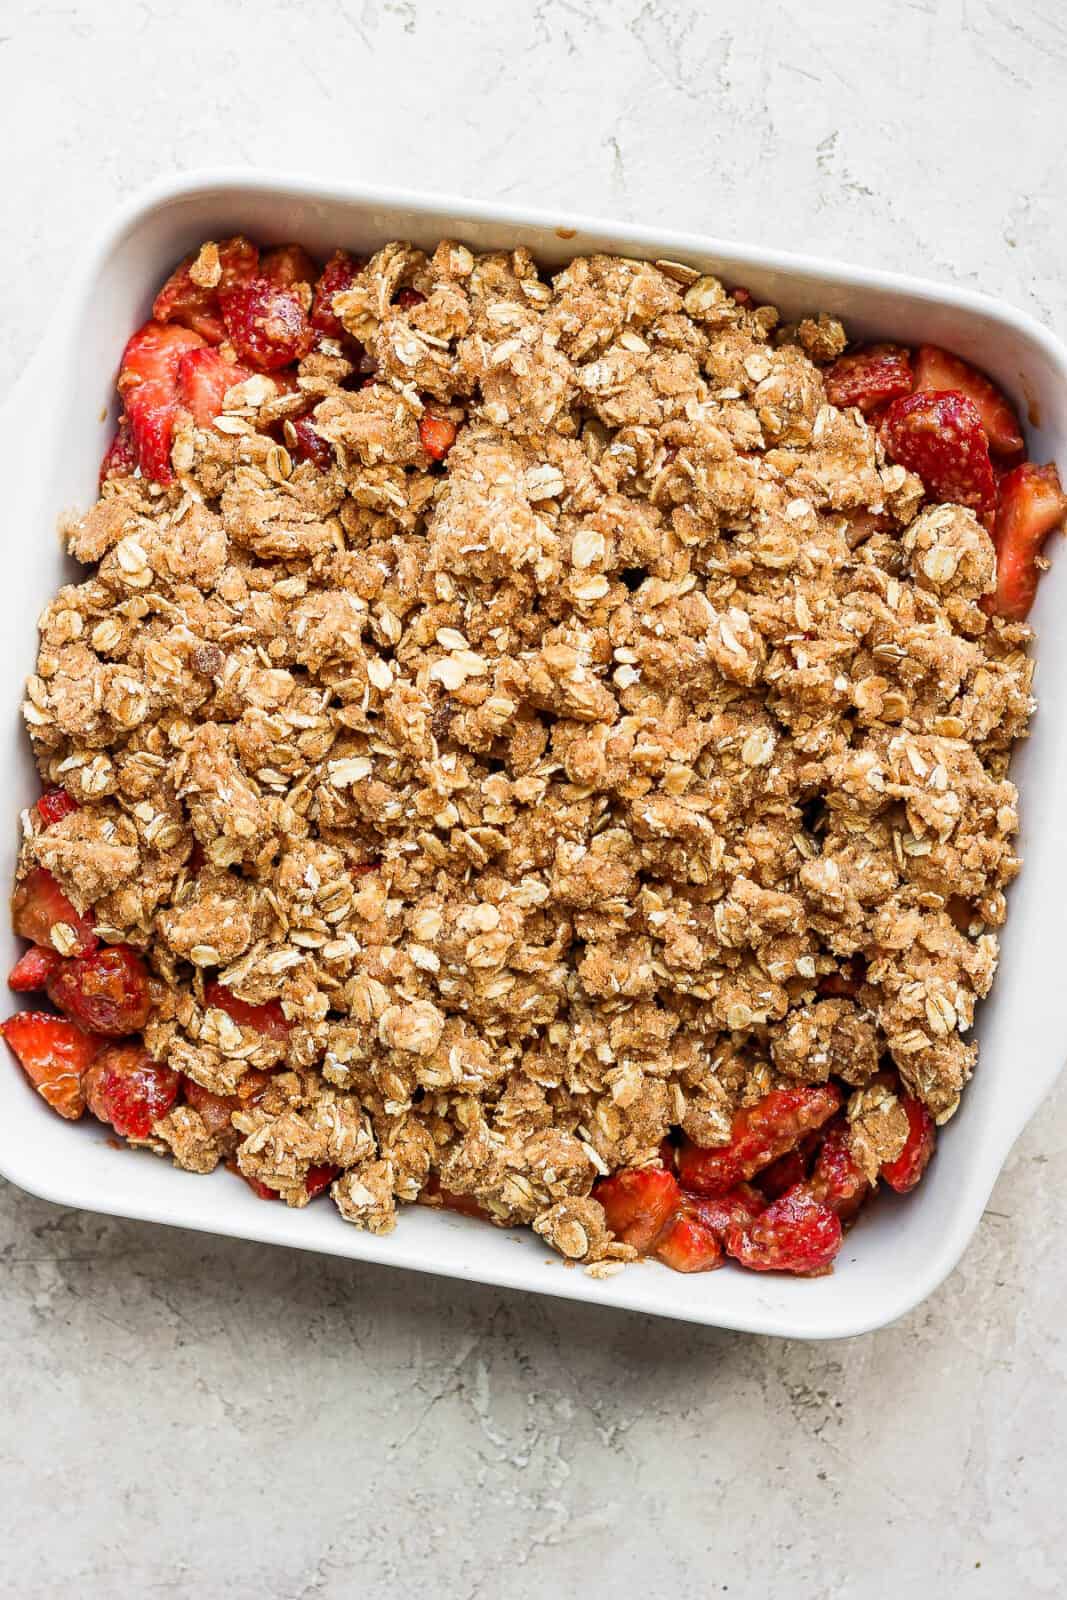 Oat topping on top of the strawberries in a baking dish.